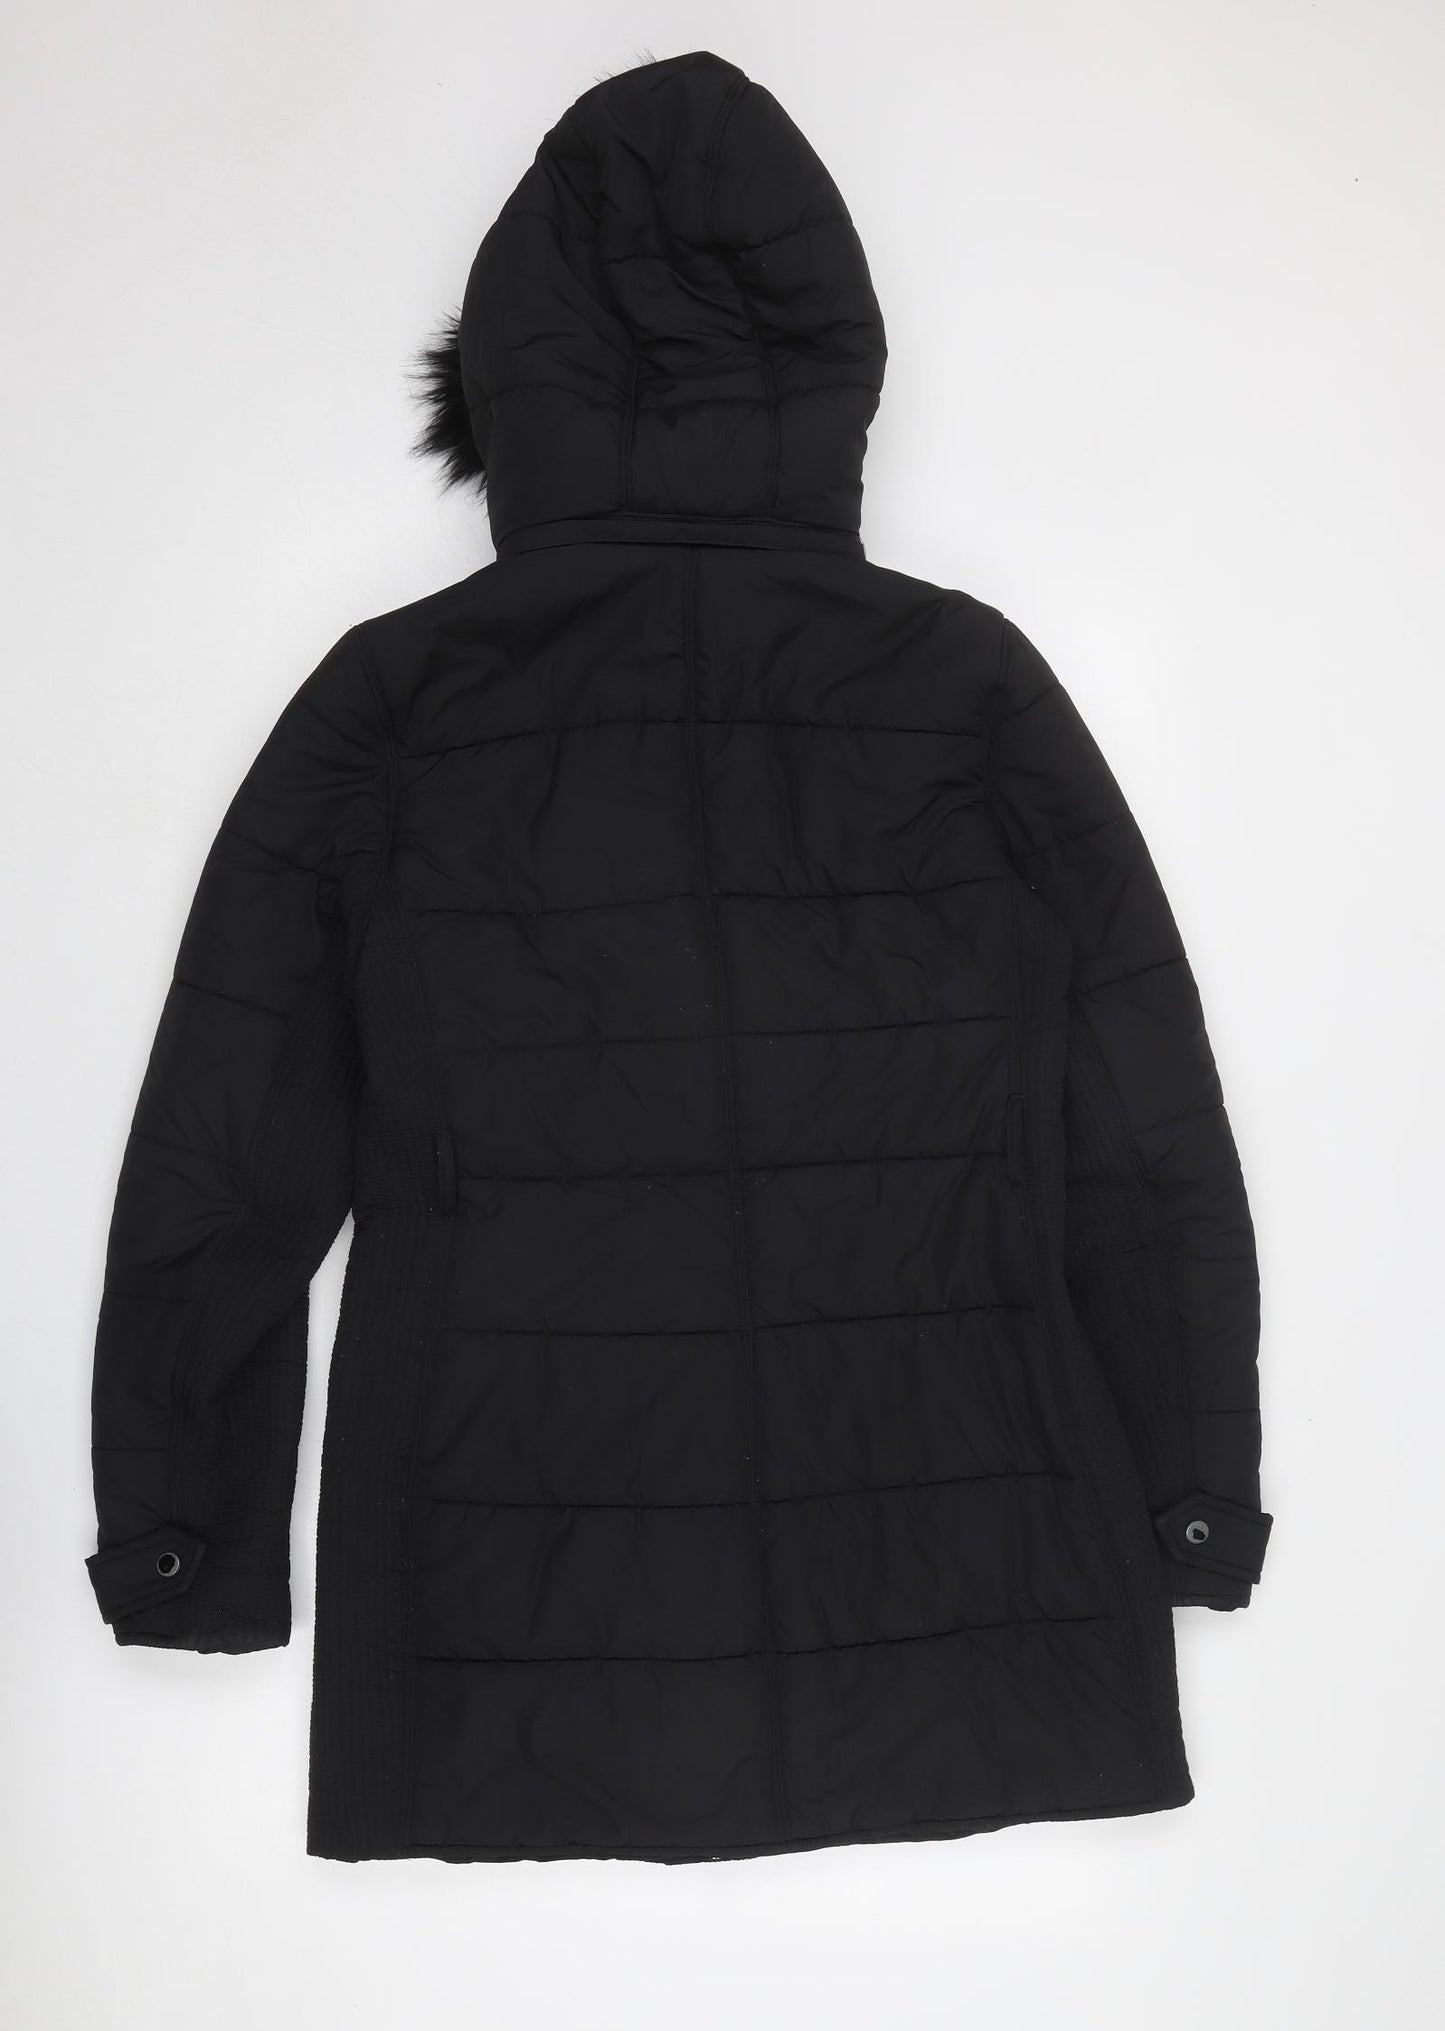 Witchery Womens Black Quilted Coat Size 10 Zip